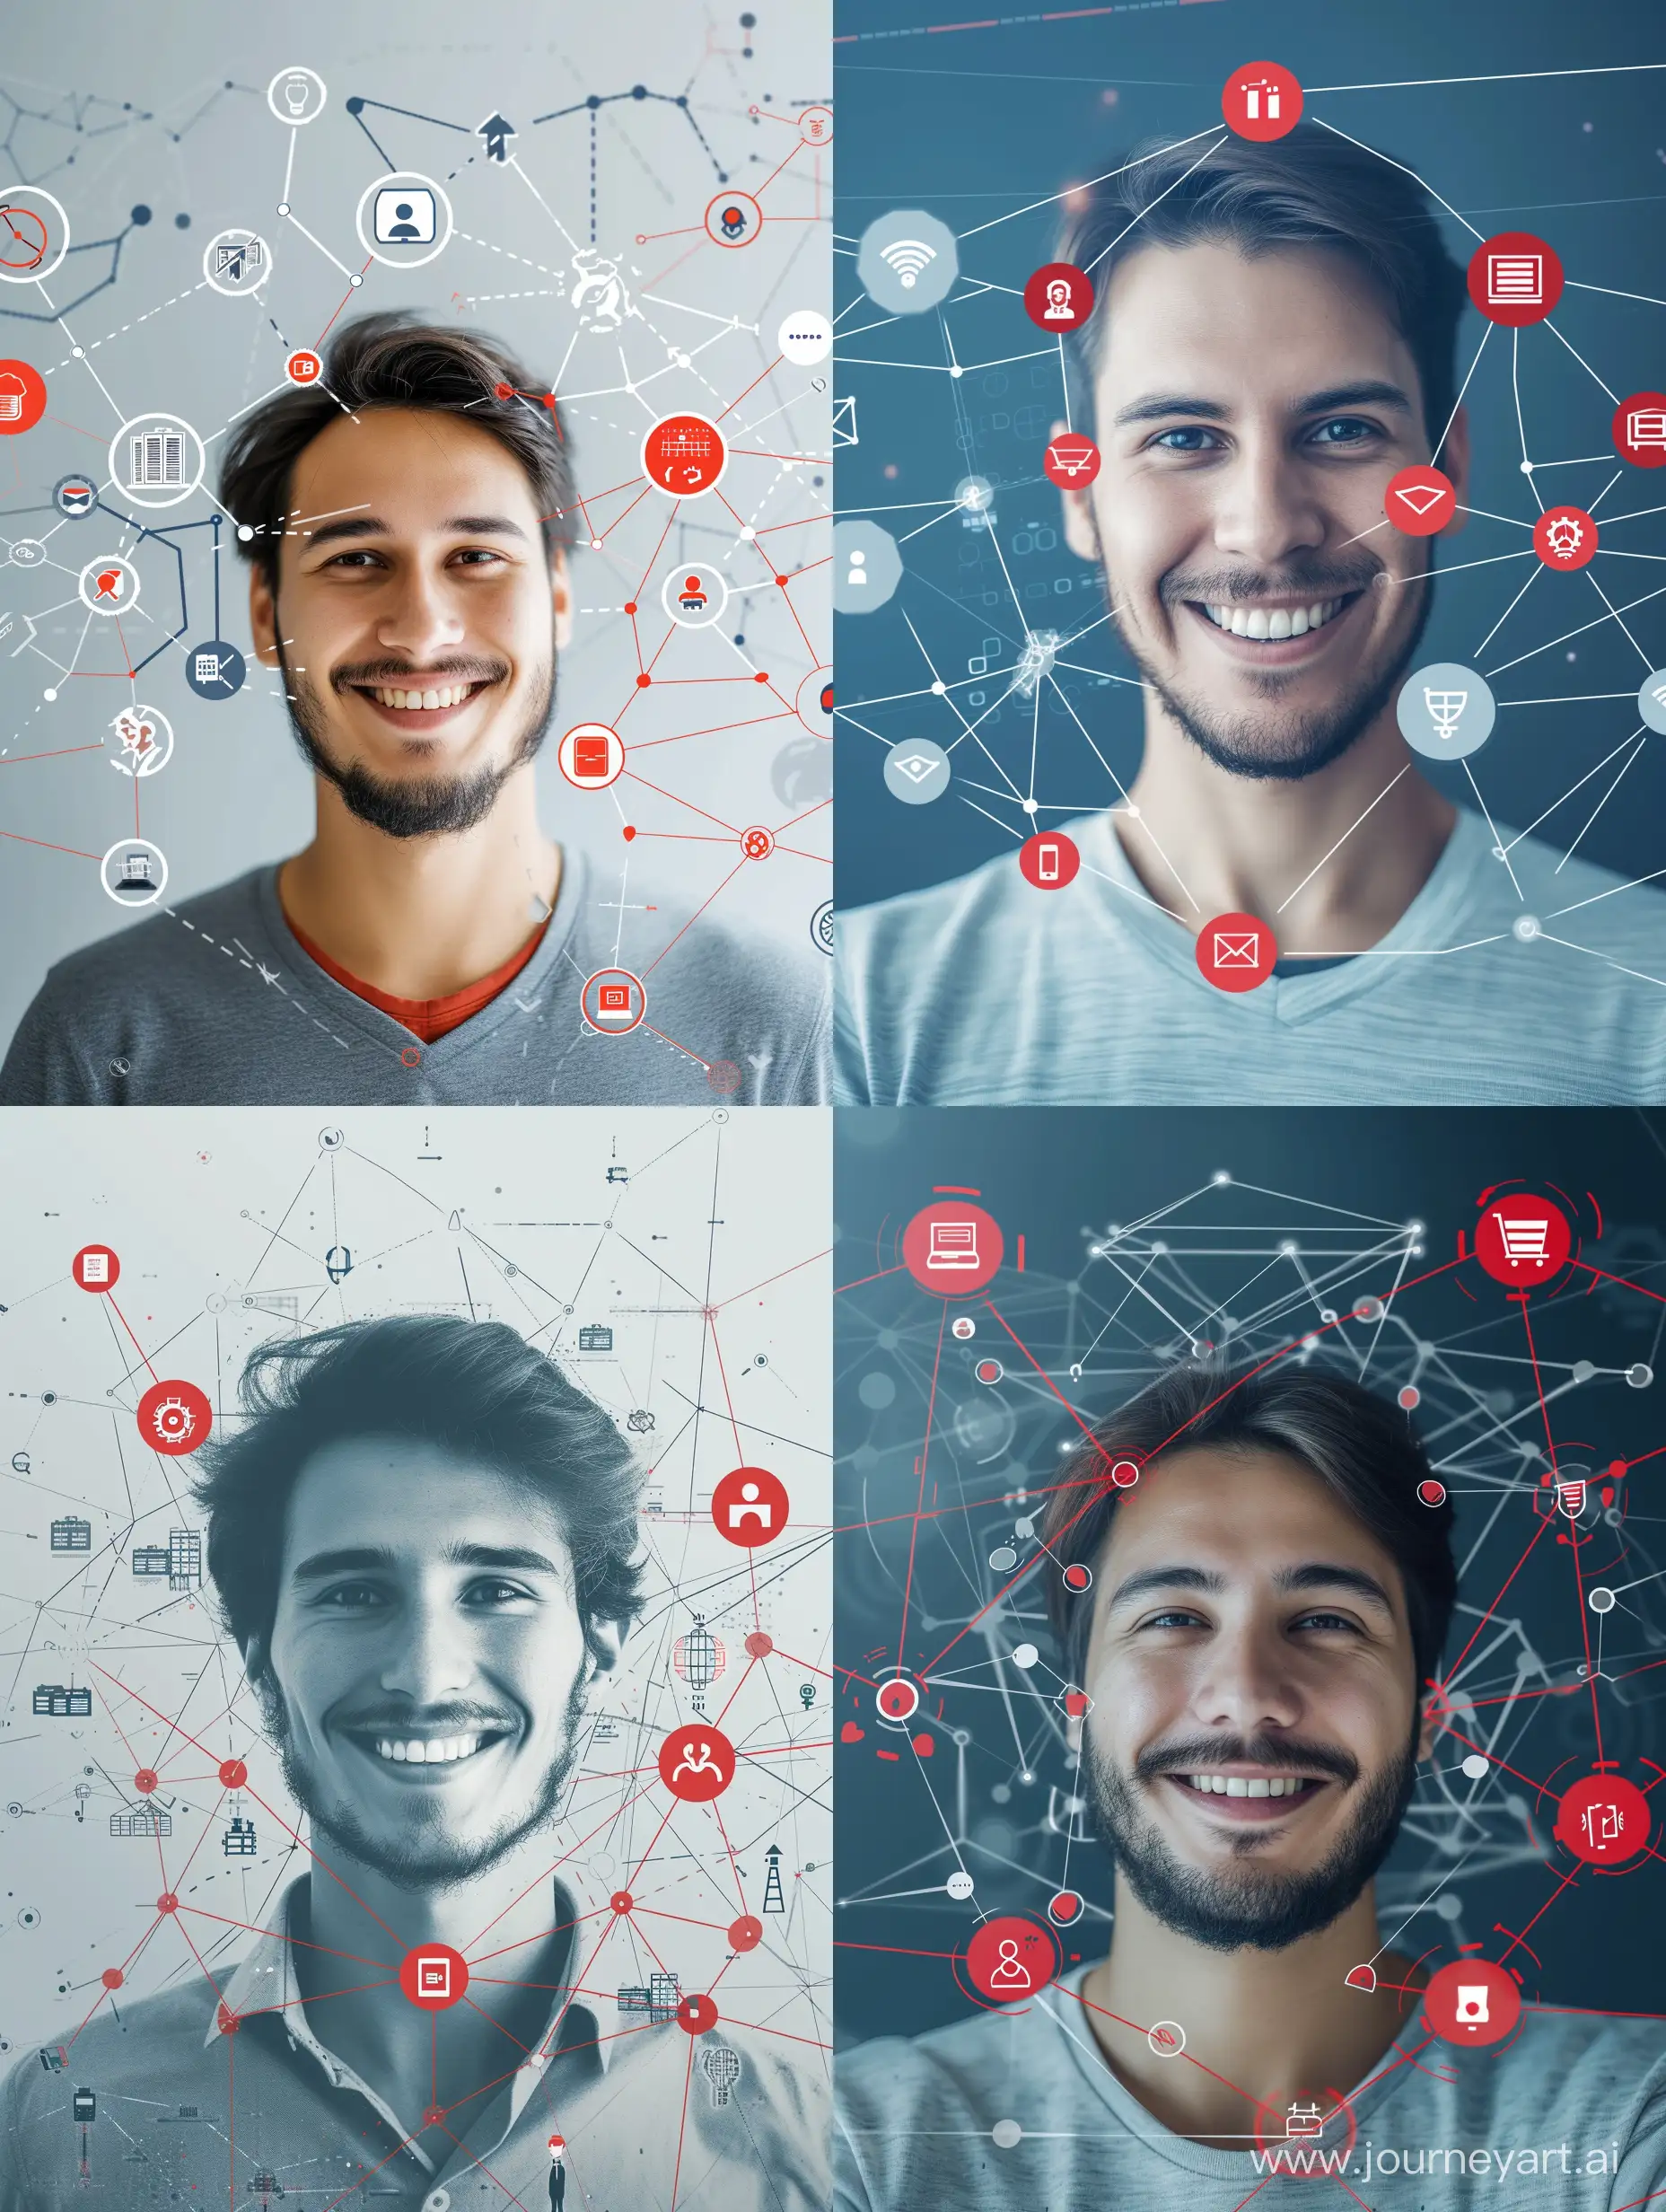 Smiling-Man-Connected-by-Digital-Icons-in-Light-Gray-Red-and-Dark-Blue-Colors